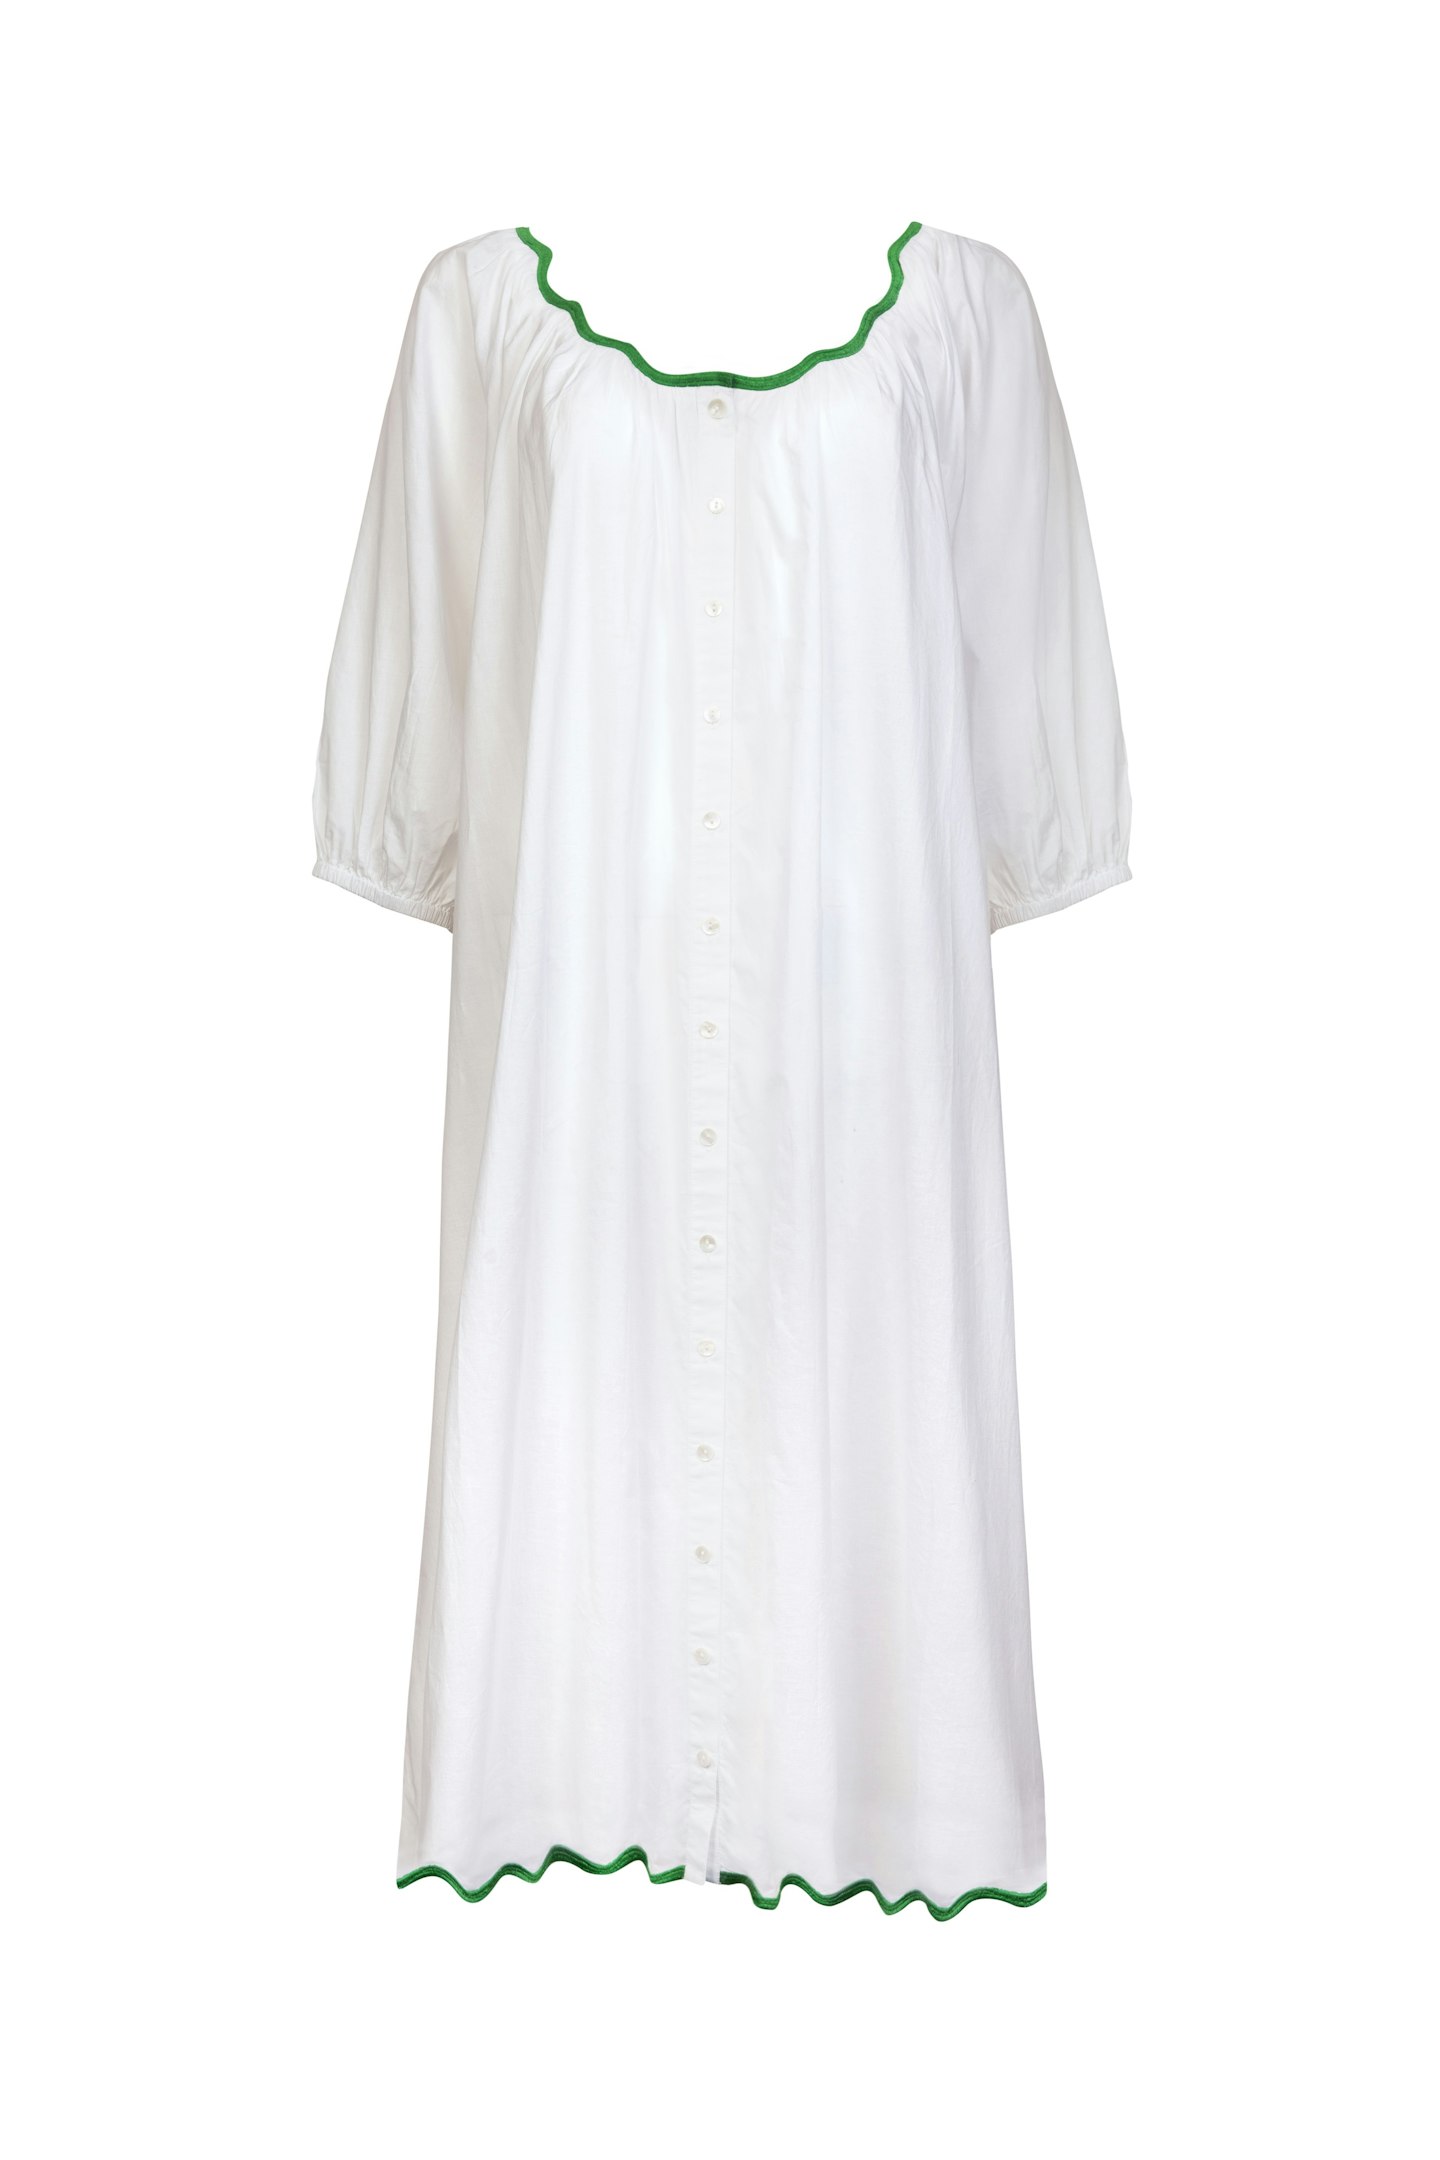 lunchtime shop Wednesday - If Only If x VCH, Cotton Amanda Nightdress, £155